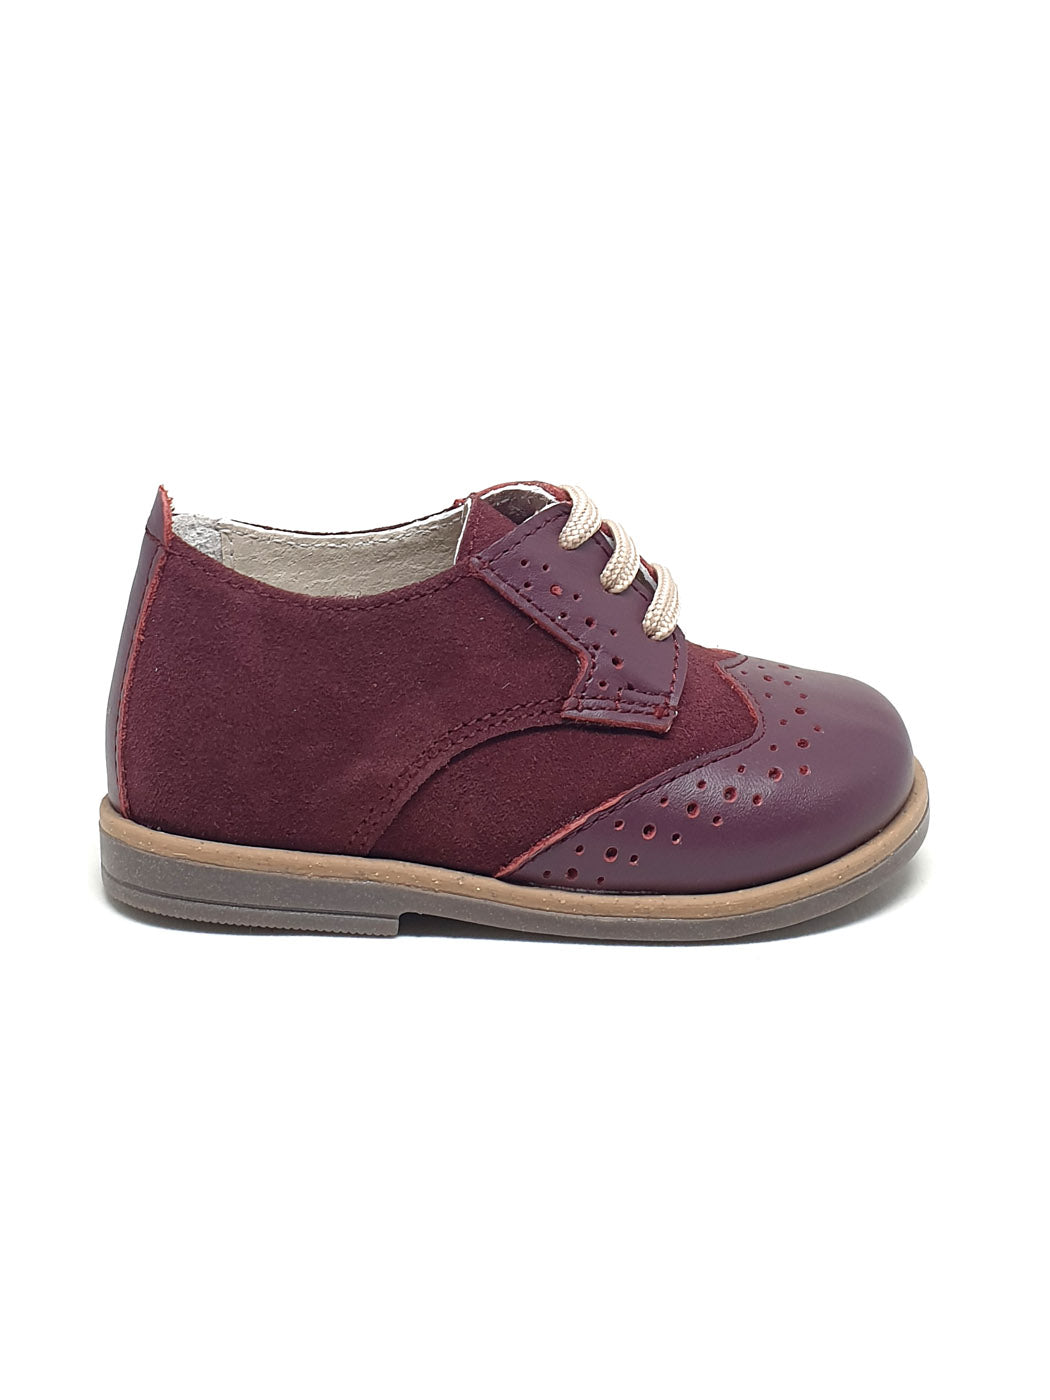 Baby Shoes Moccasins for boy - Burgundy